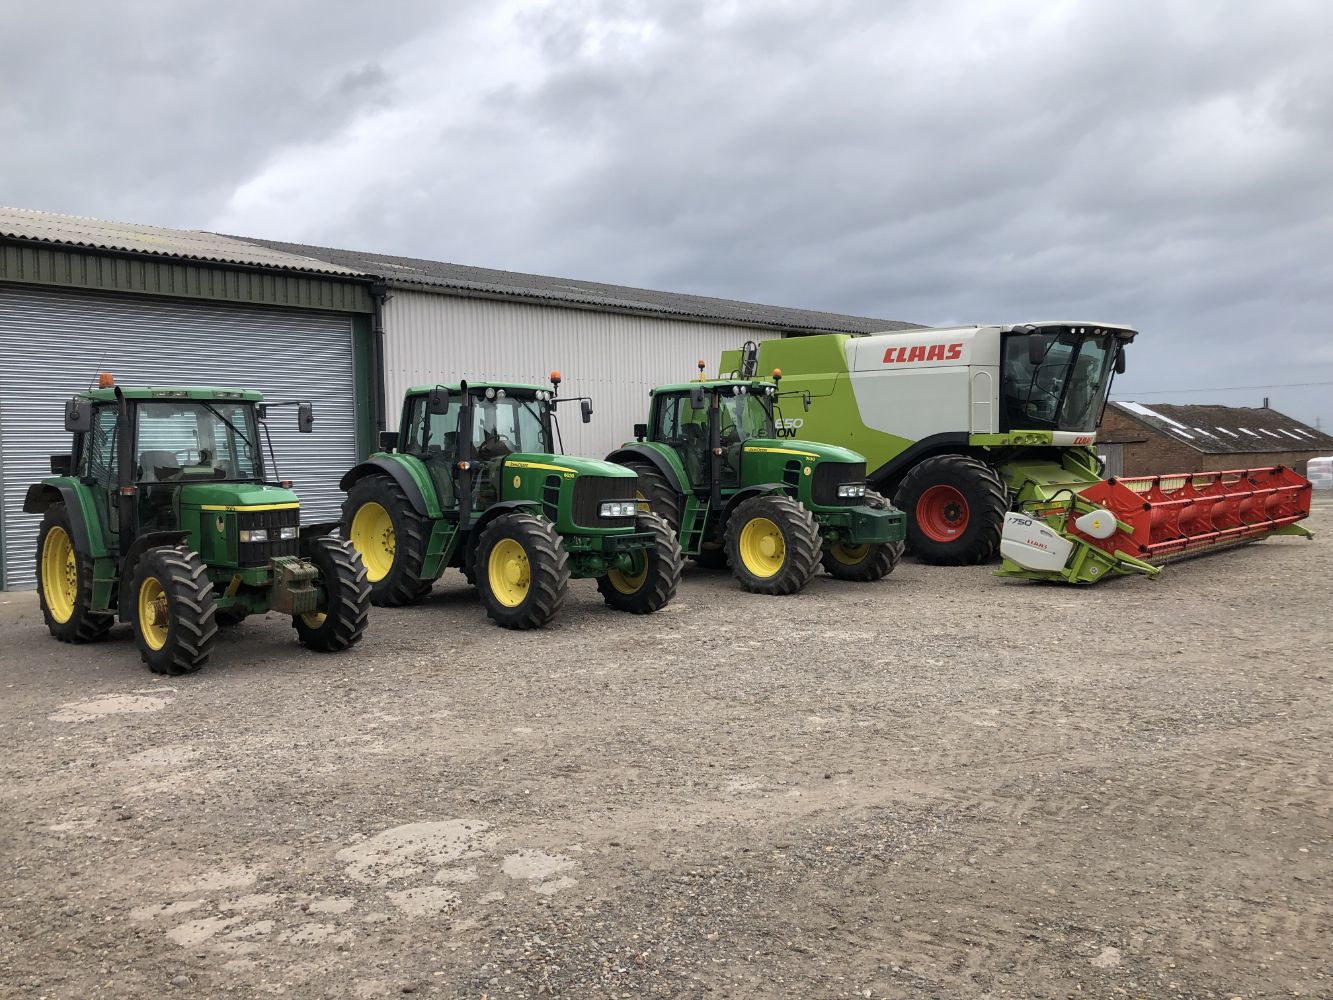 Sale by Auction of Modern Farm Machinery & Equipment